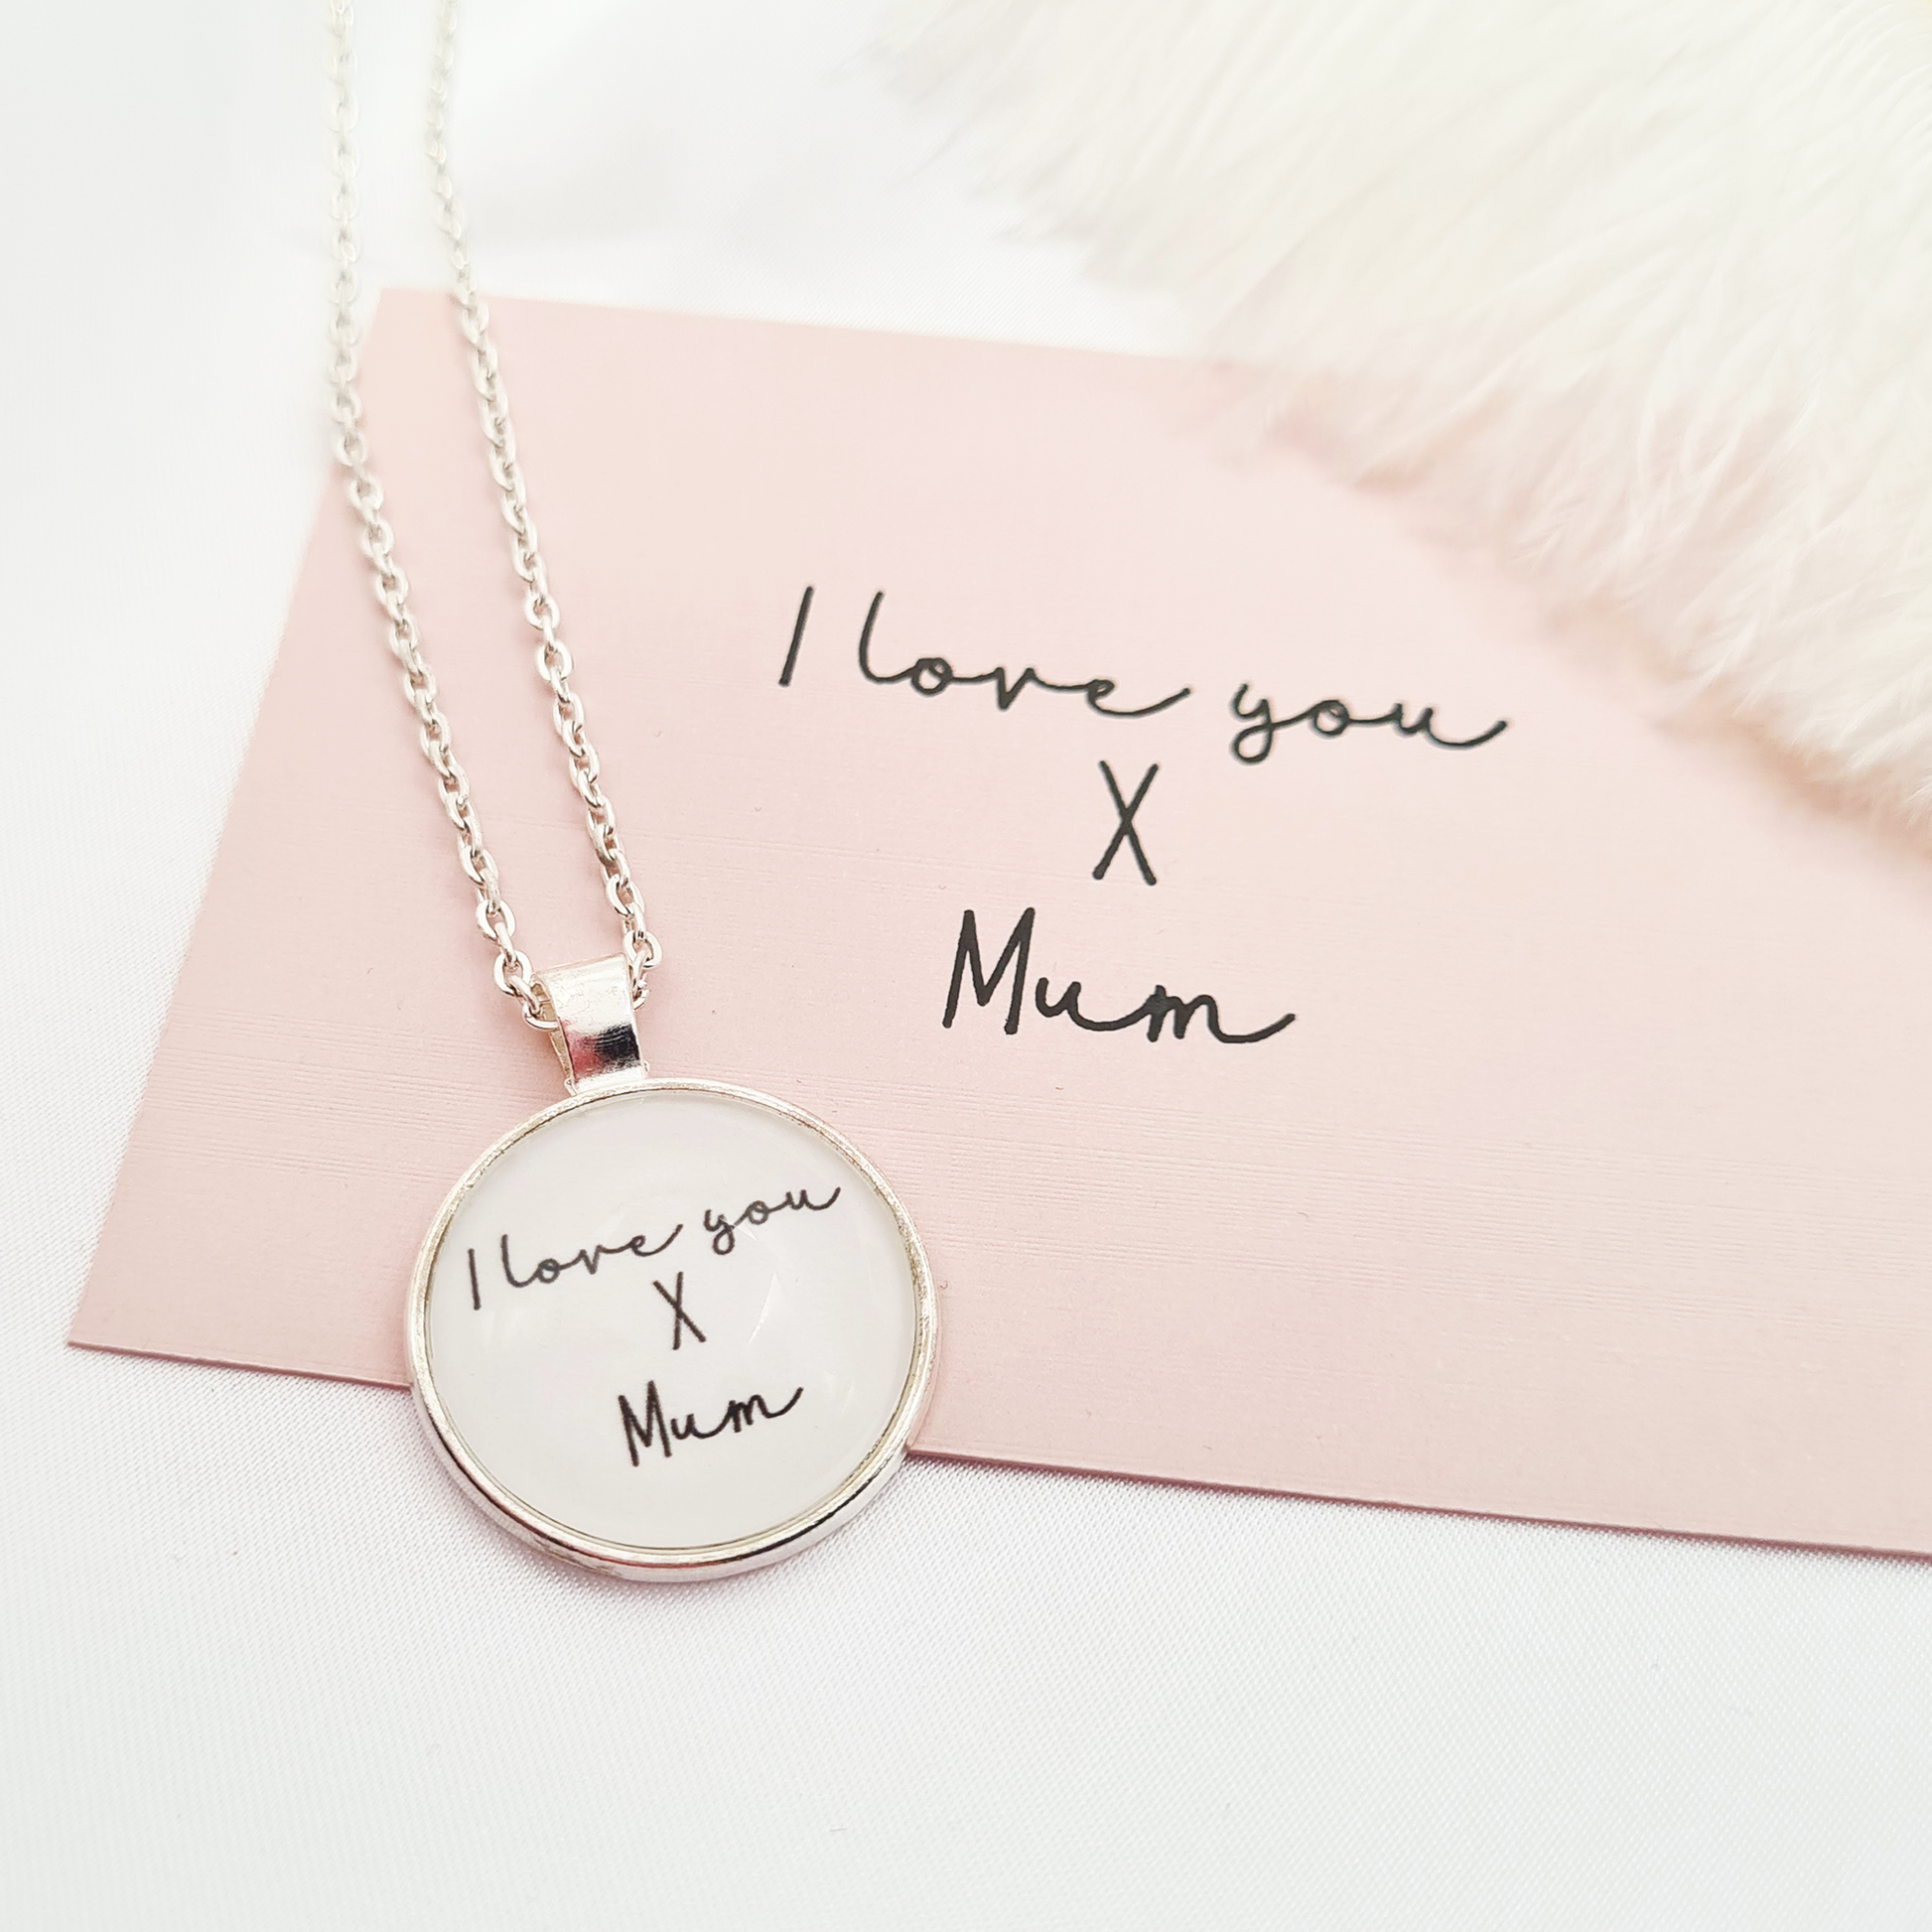 Personalised handwriting necklace with silver pendant